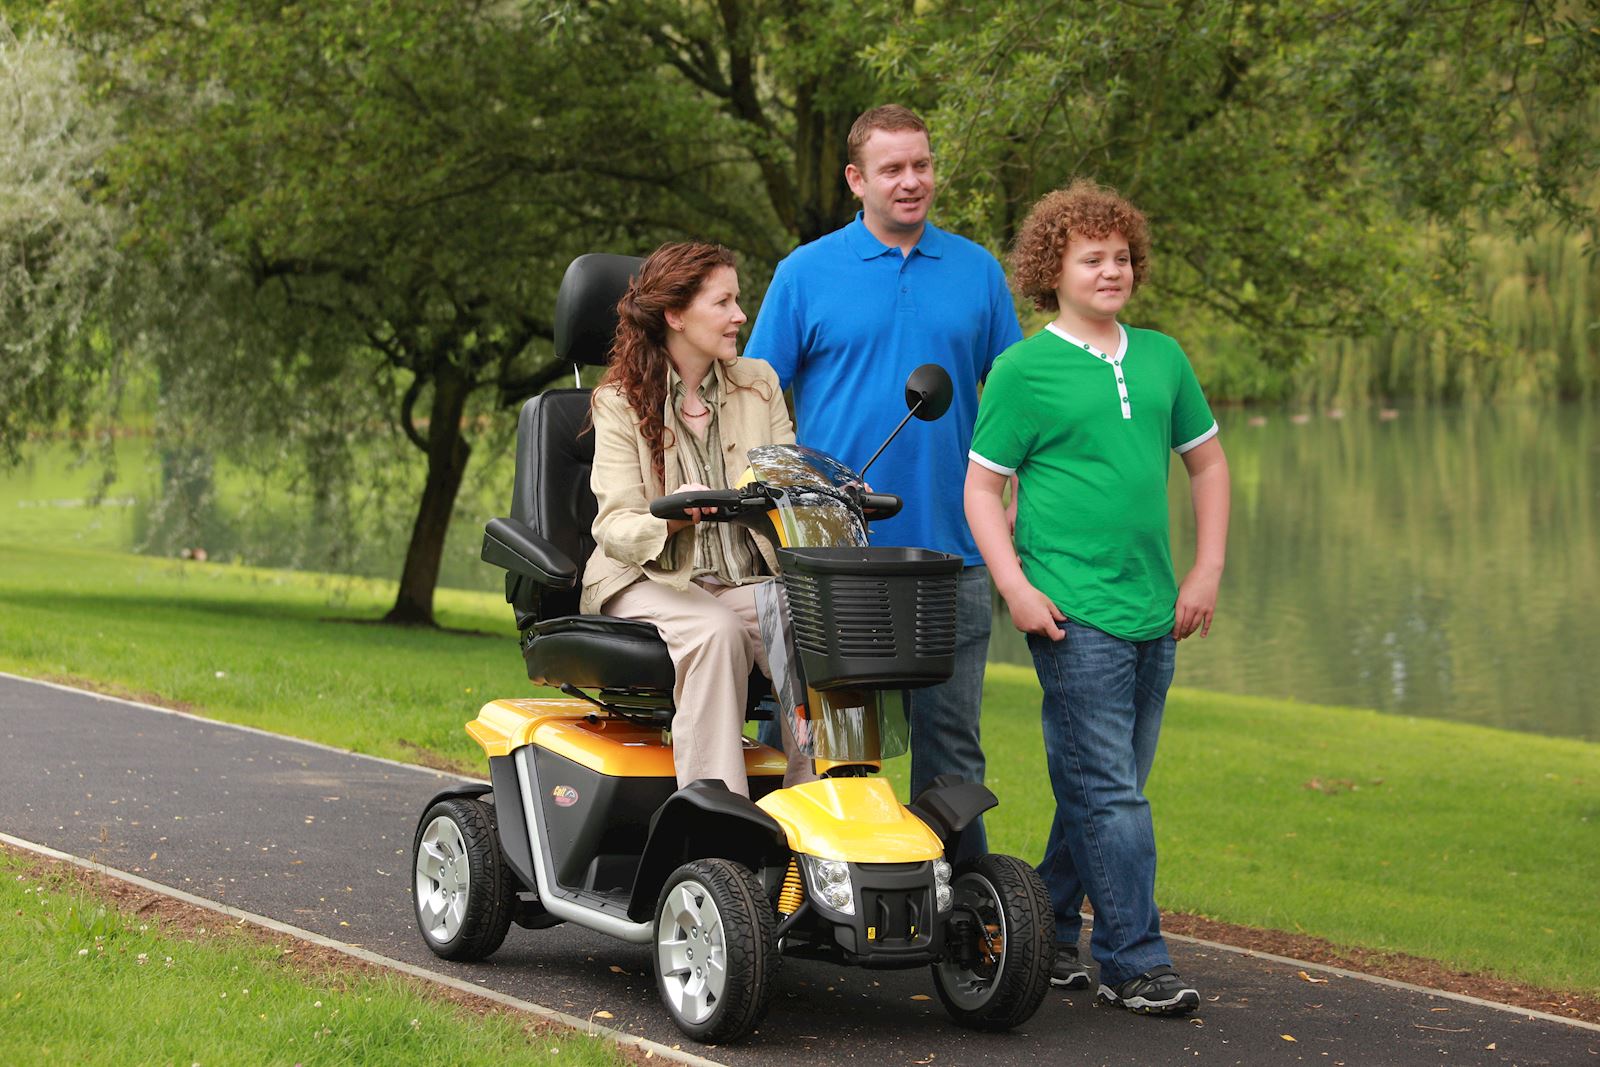 A woman riding a mobility scooter with two people walking next to her